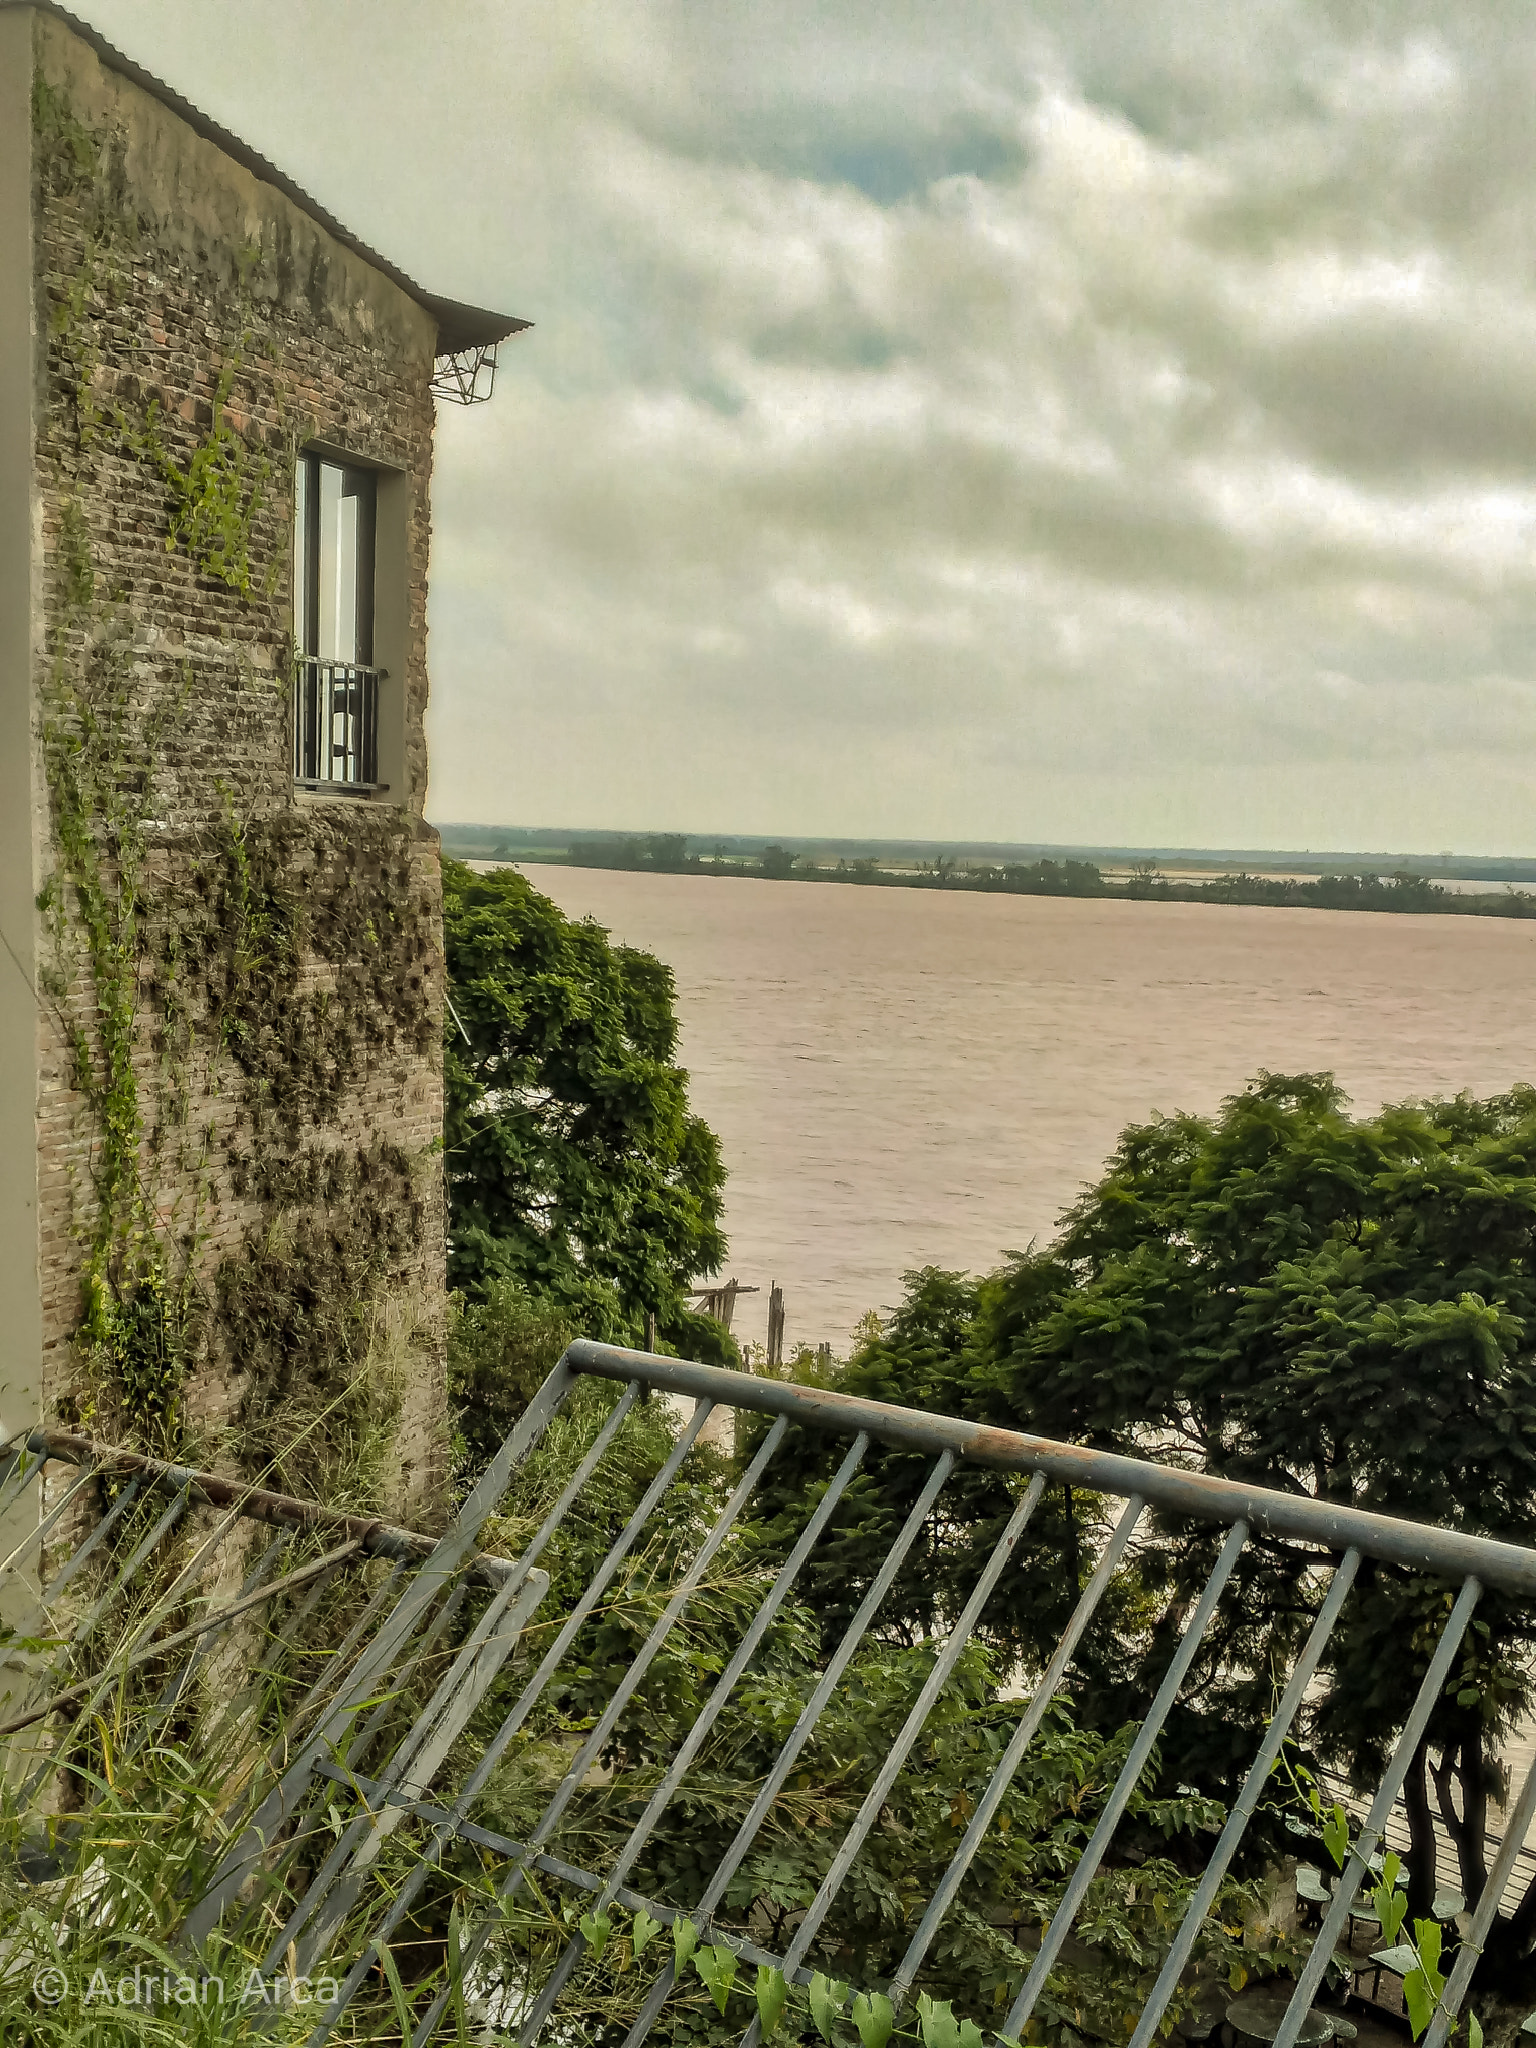 ASUS ZenFone Max (ZC550KL) sample photo. Old structure looking towards the river photography